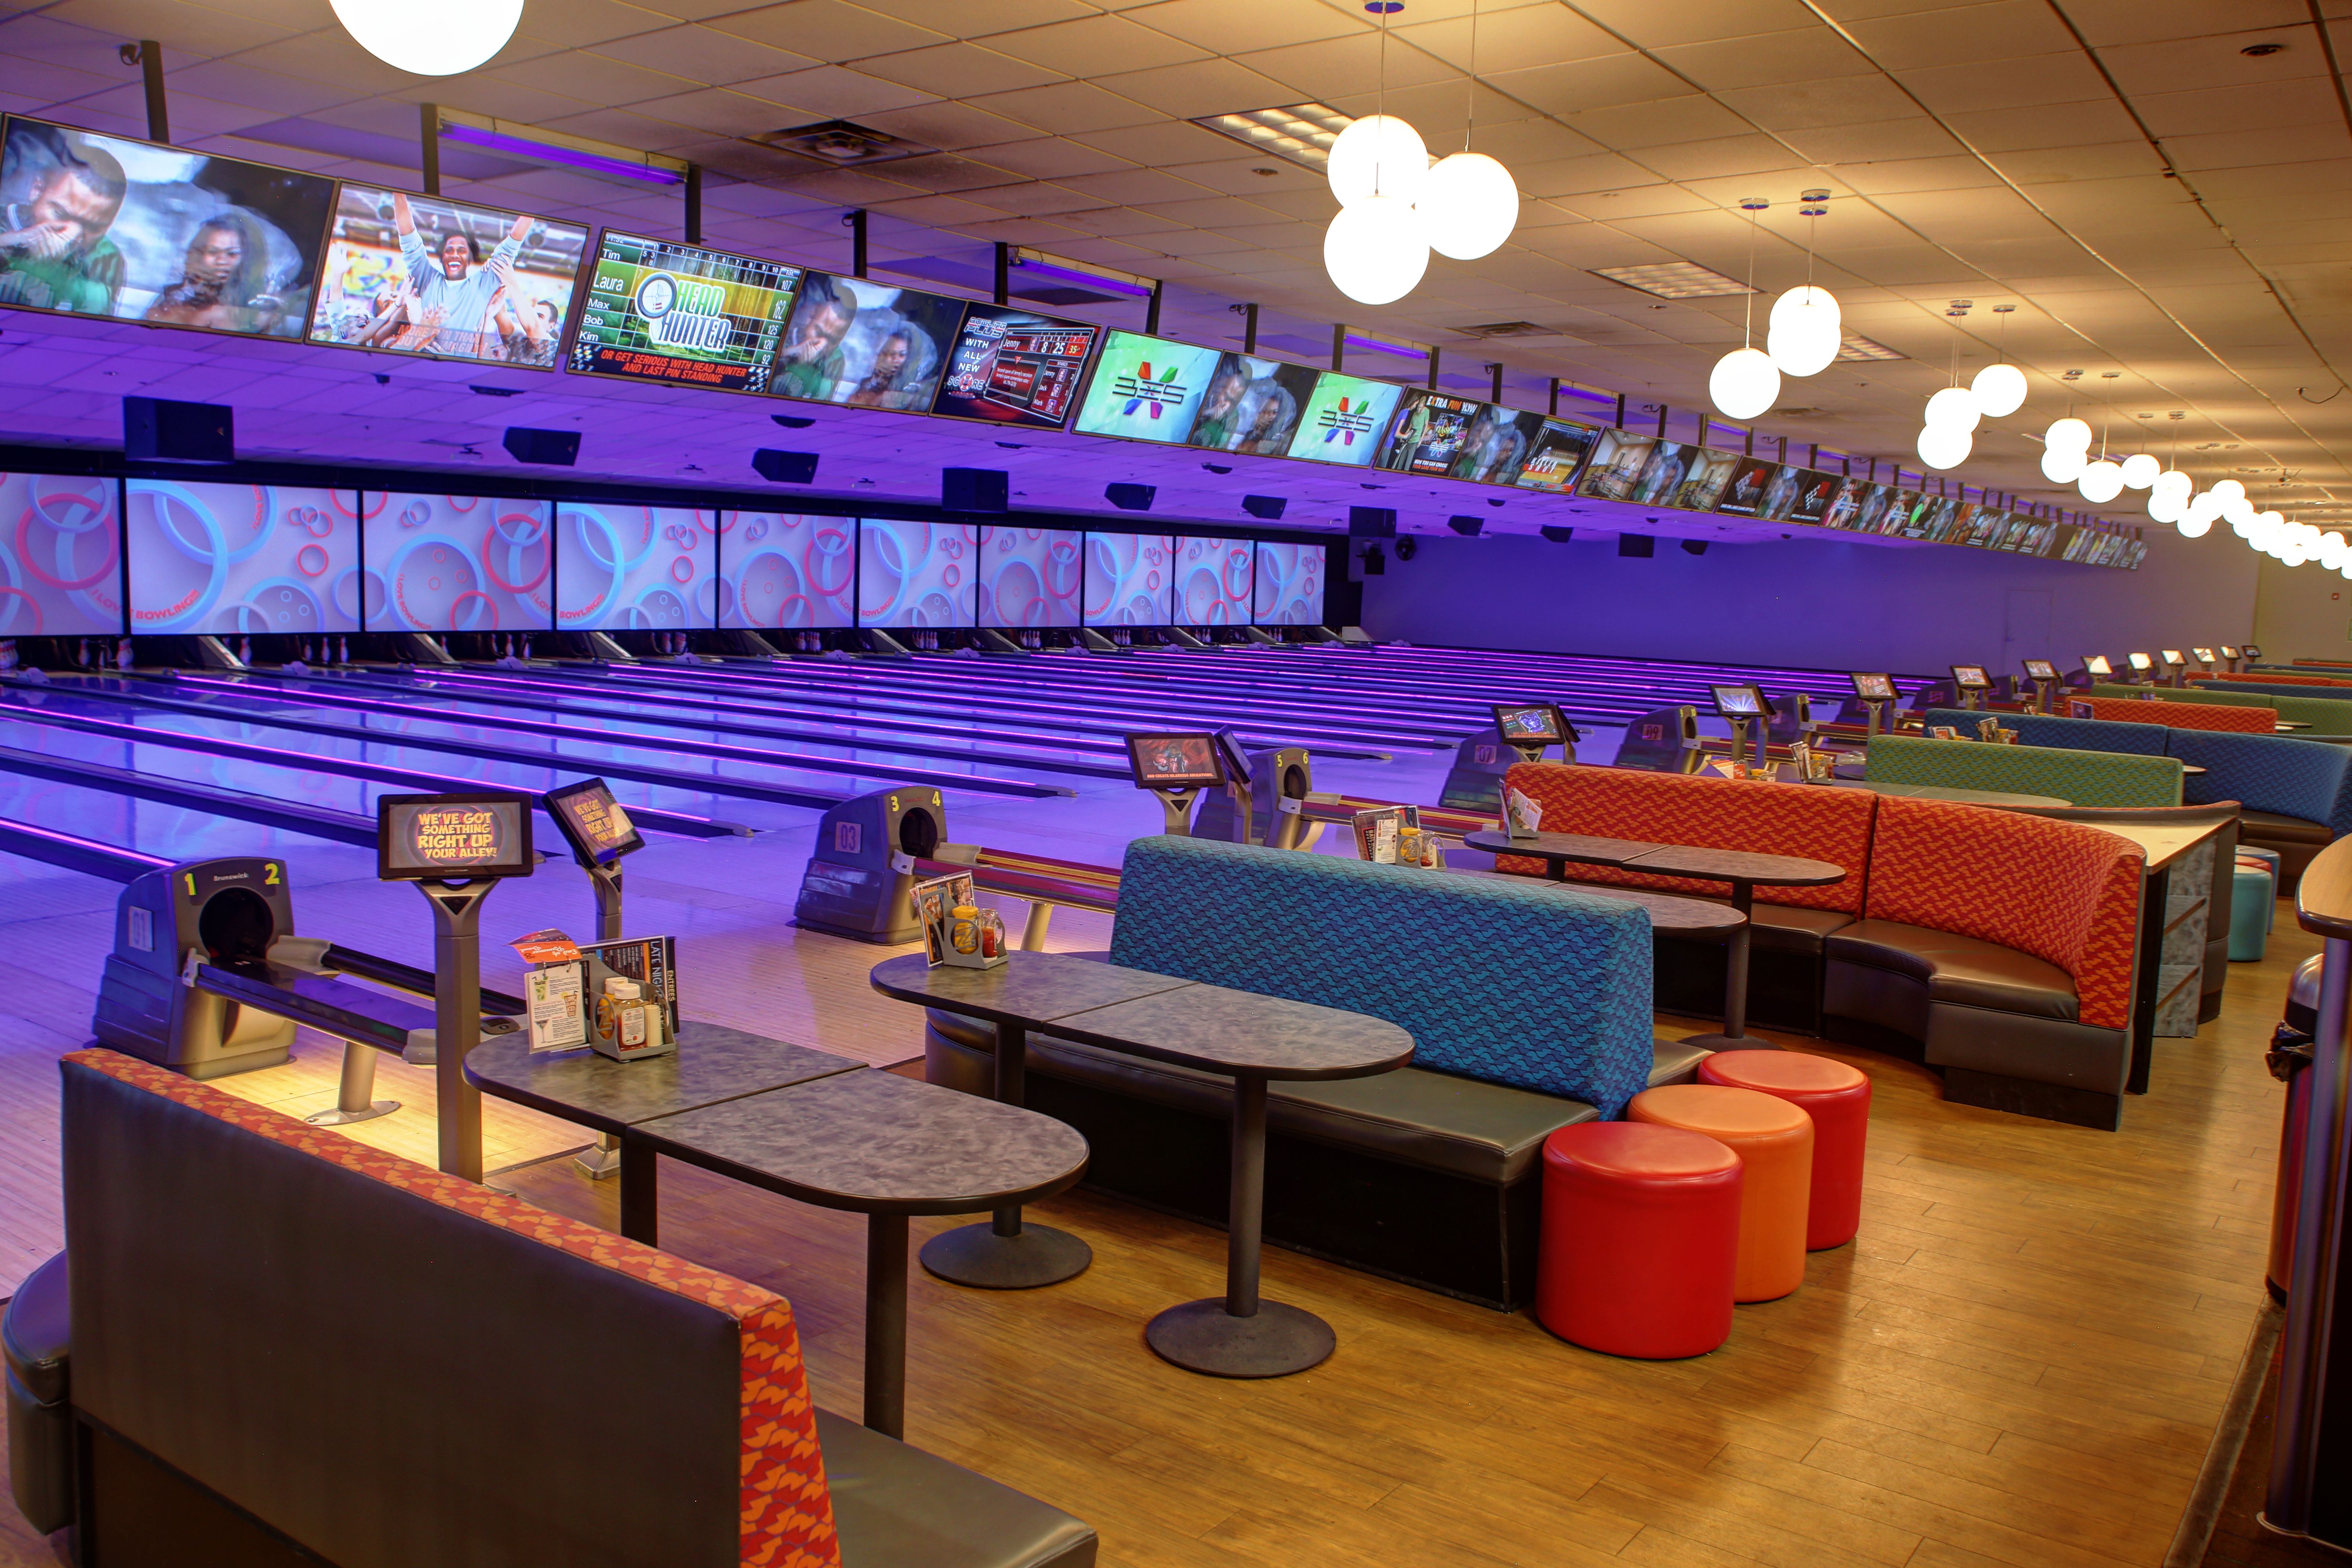 Get a strike bowling at Zone 28! Zone 28 Pittsburgh (412)828-1100